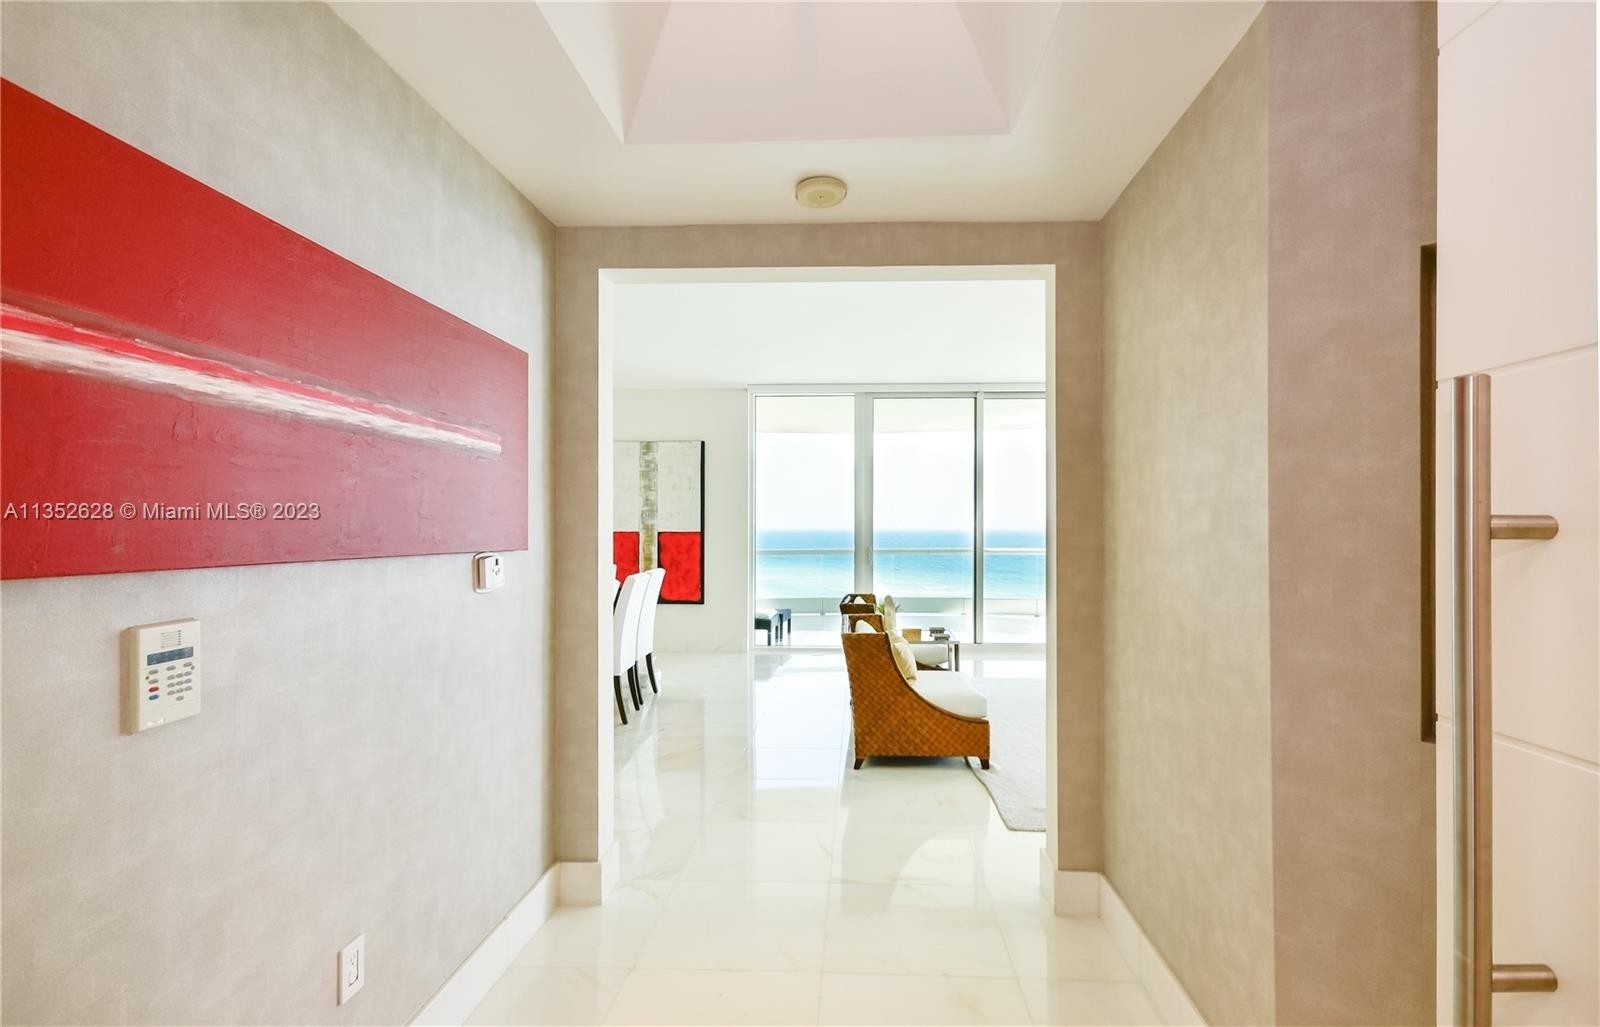 4. Condominiums for Sale at 16051 Collins Ave, 704 Sunny Isles Beach, FL 33160